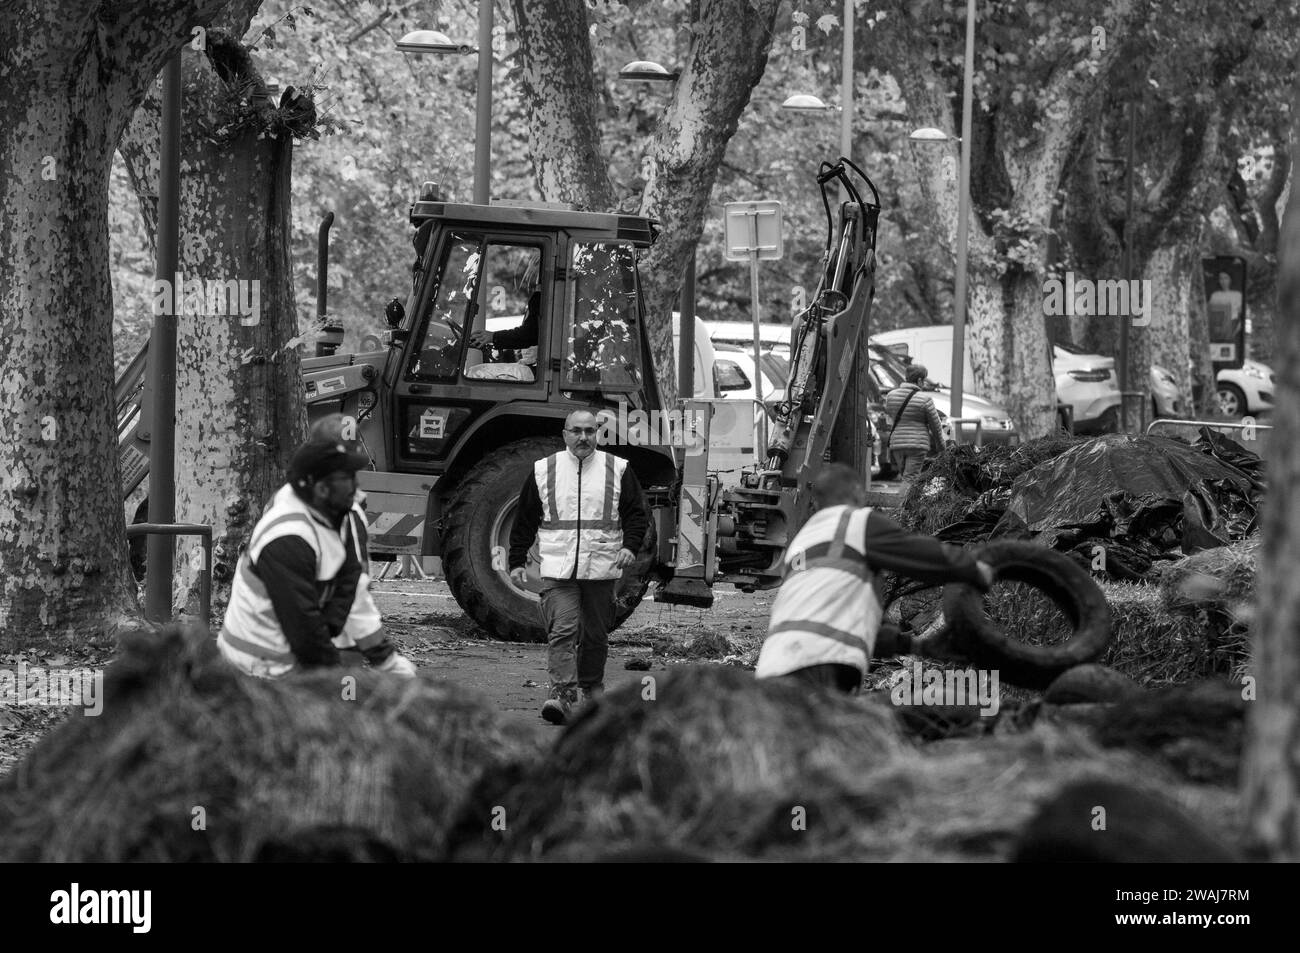 Workers clearing dumped tyres and manure after farmers protest,Quai Eugène Cavaignac, Cahors, Lot department, France Stock Photo